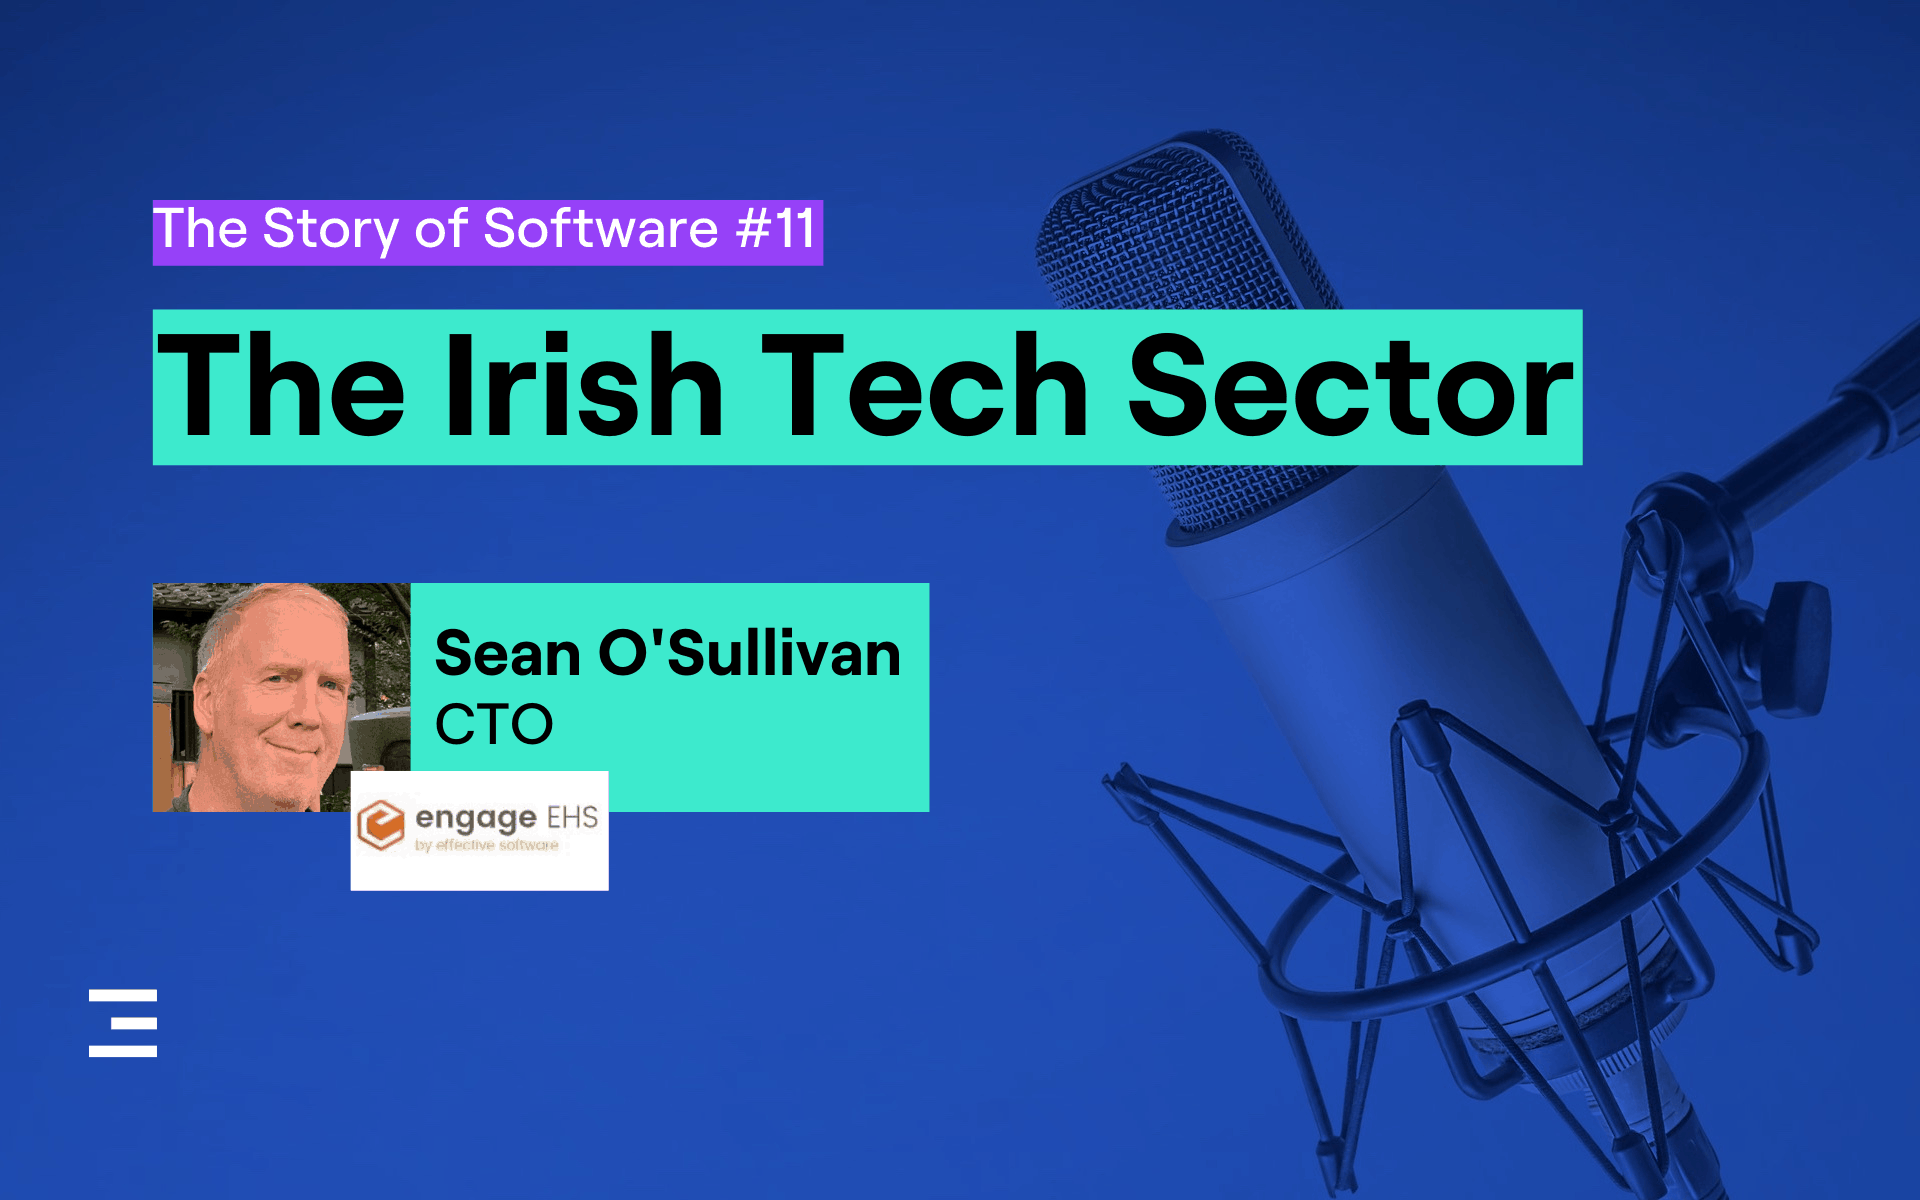 The Irish Tech Sector - Story of Software podcast episode 11